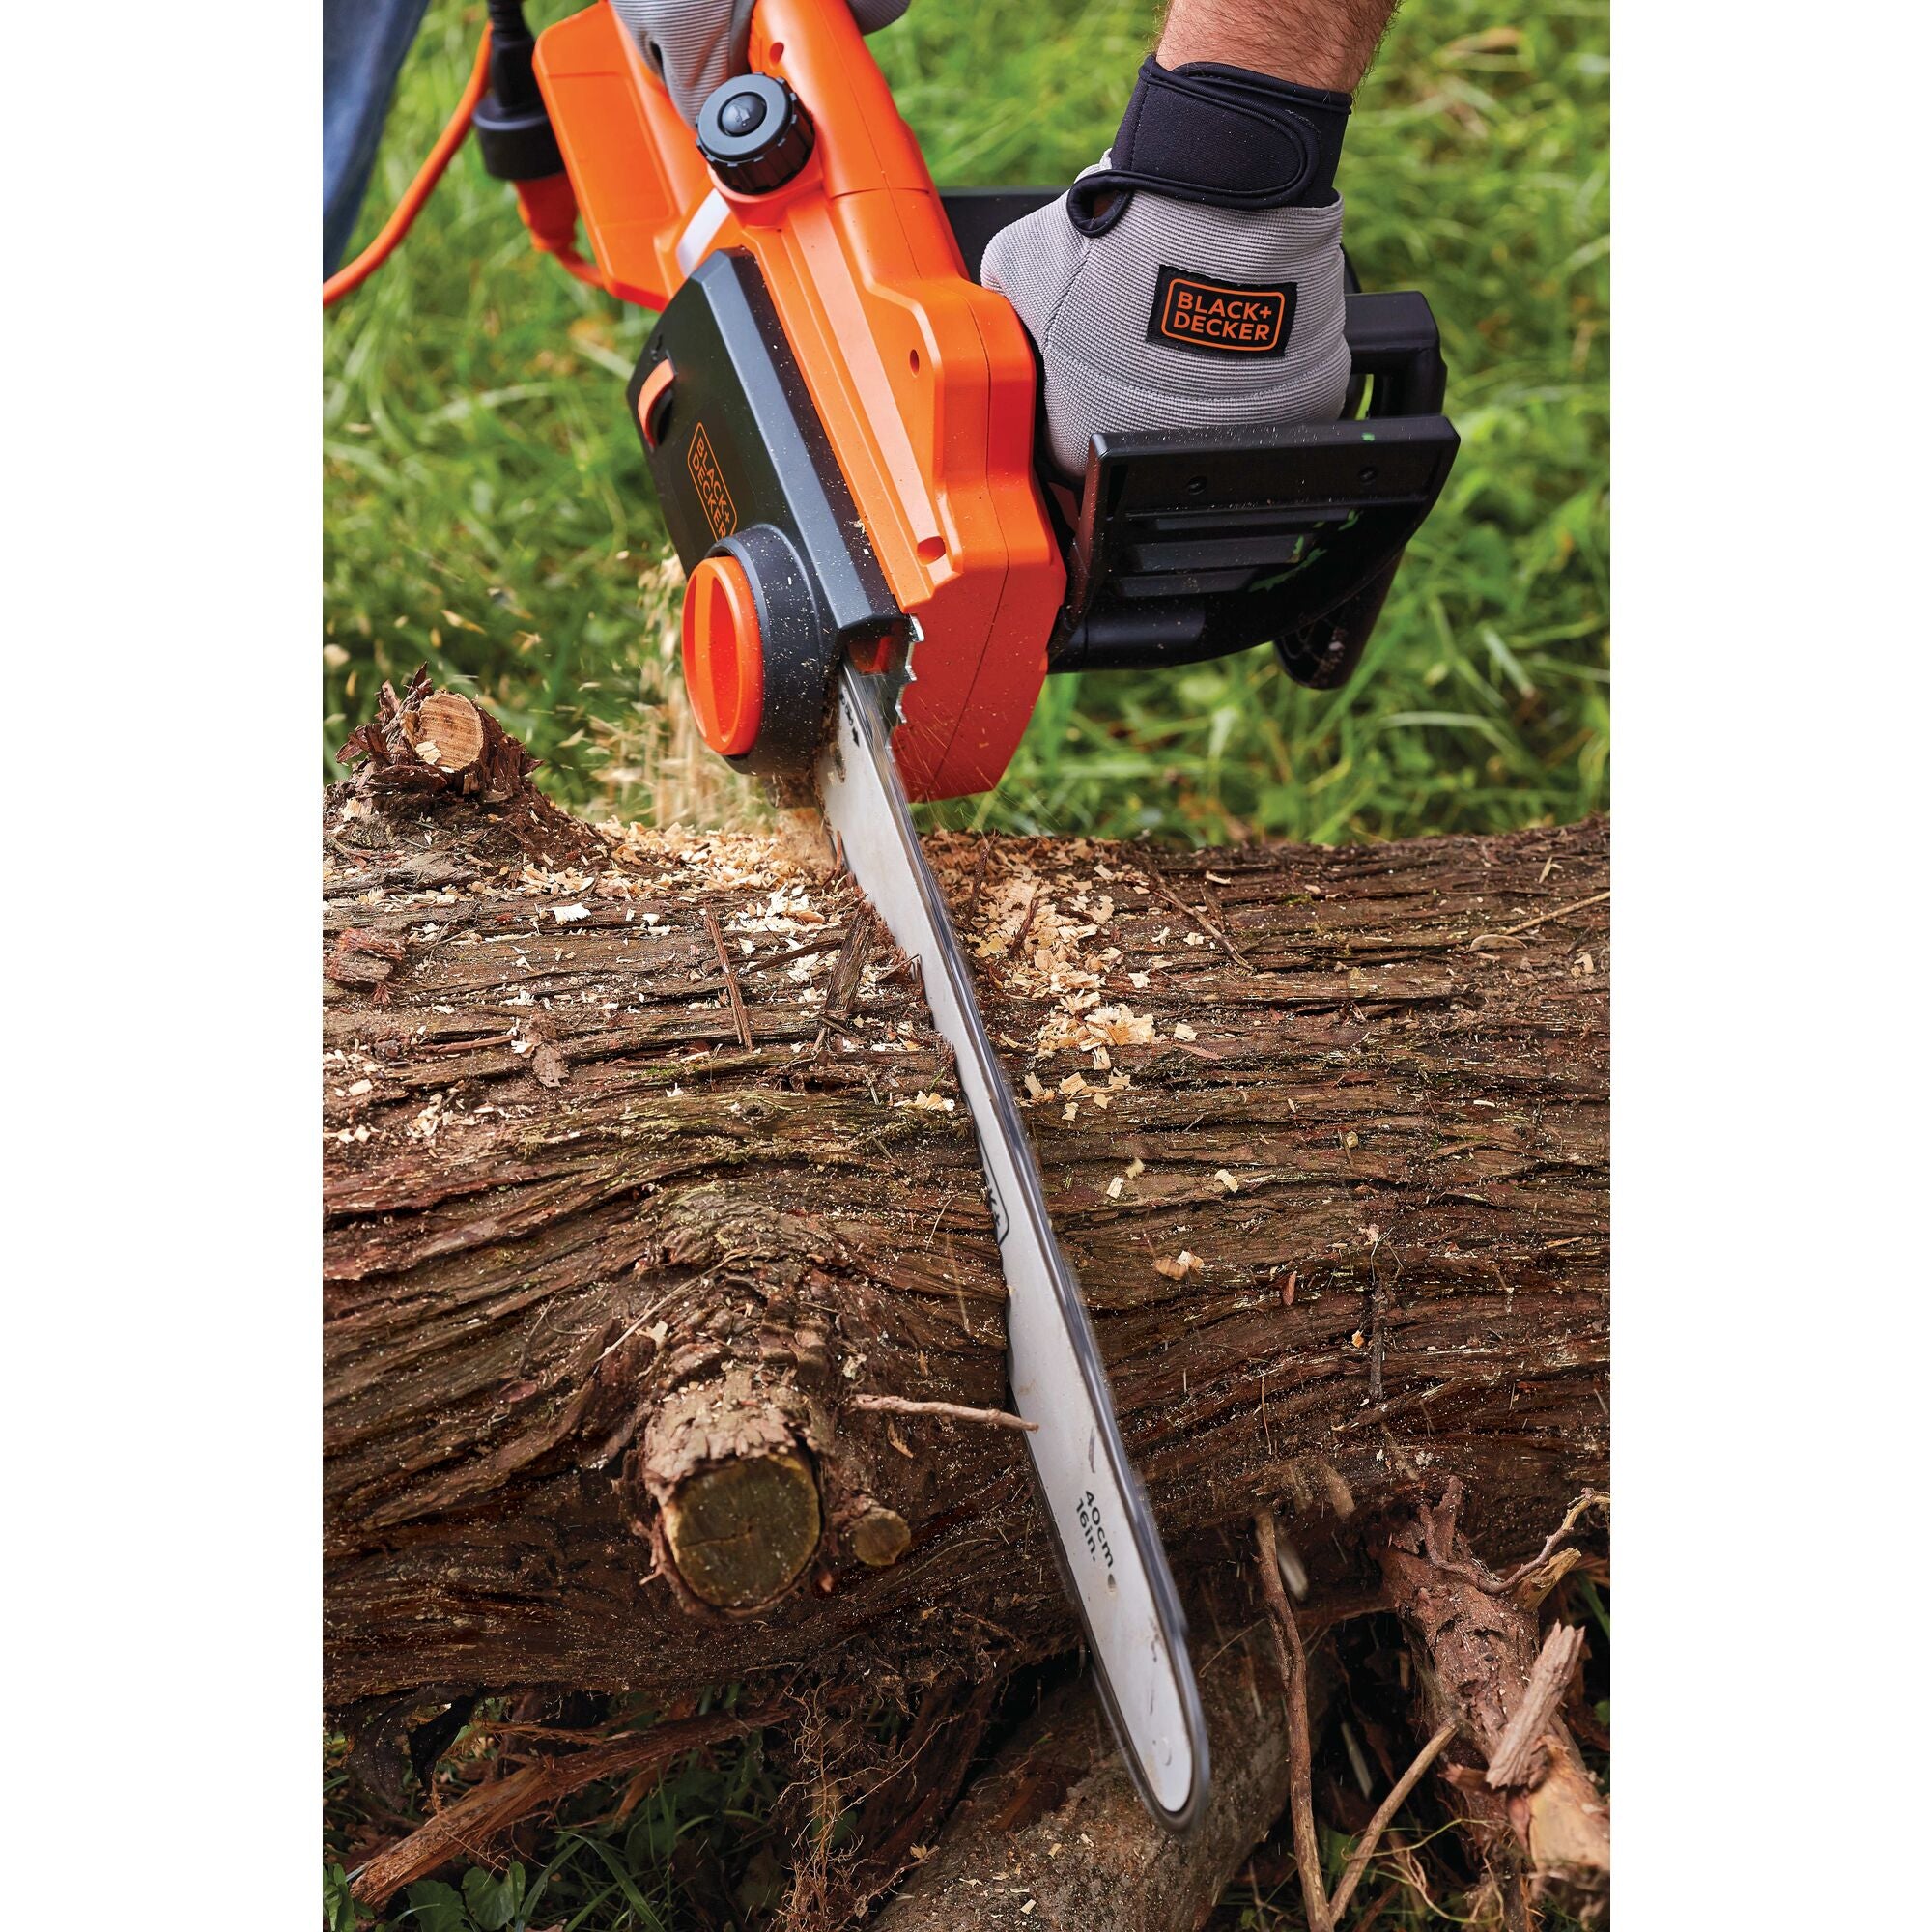 BLACK+DECKER Electric Chainsaw is cutting a huge tree trunk.